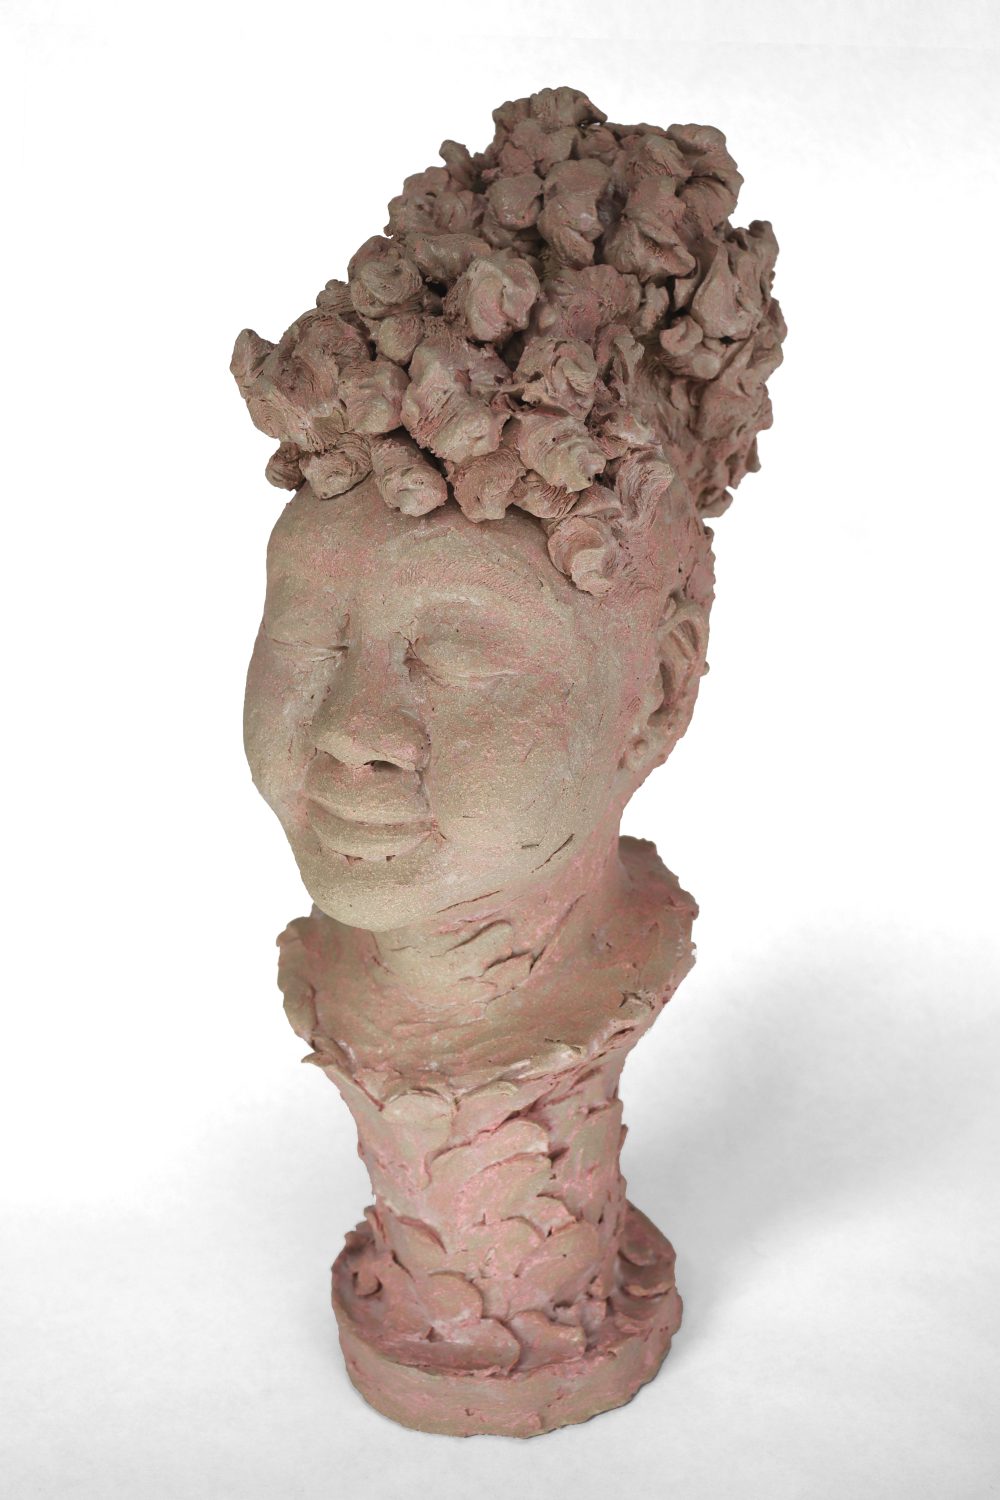 Sculpted portrait of a woman with her eyes closed into a slight smile with round cheeks, hair is pulled back into a poof of curls, details of ear piercings on both ears, the base is built of petal-like smudges pushing up into the collar and neck of the bust as slight pink stains come through in the deeper edges.